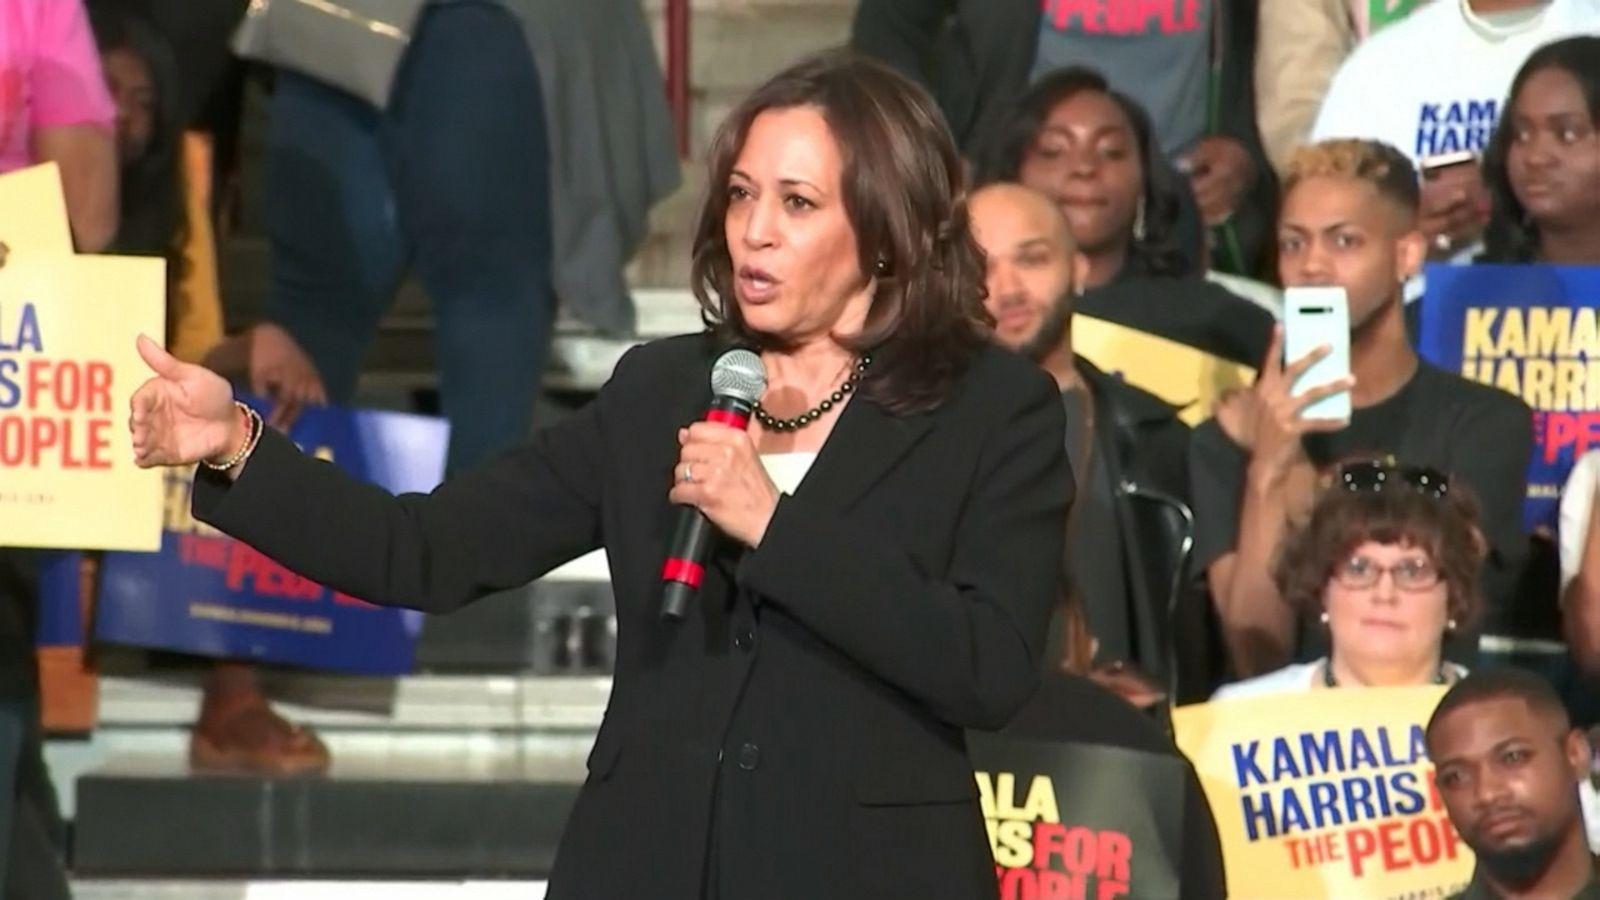 Kamala Harris: Everything you need to know about the 2020